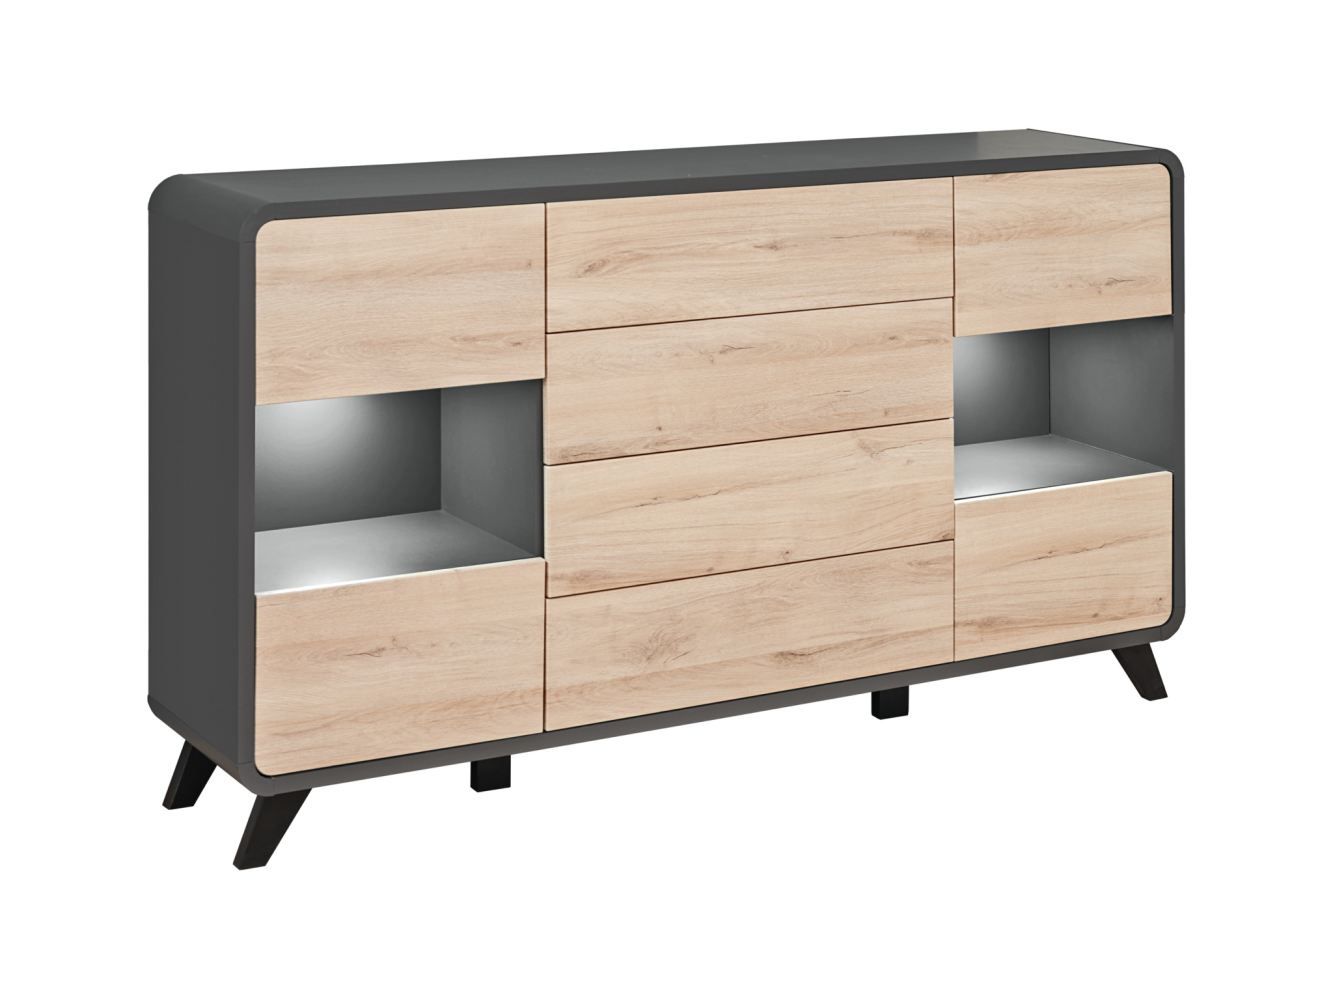 Sideboard / chest of drawers Takle 06, color: anthracite / oak Kronberg - Dimensions: 102 x 160 x 40 cm (H x W x D), with six compartments